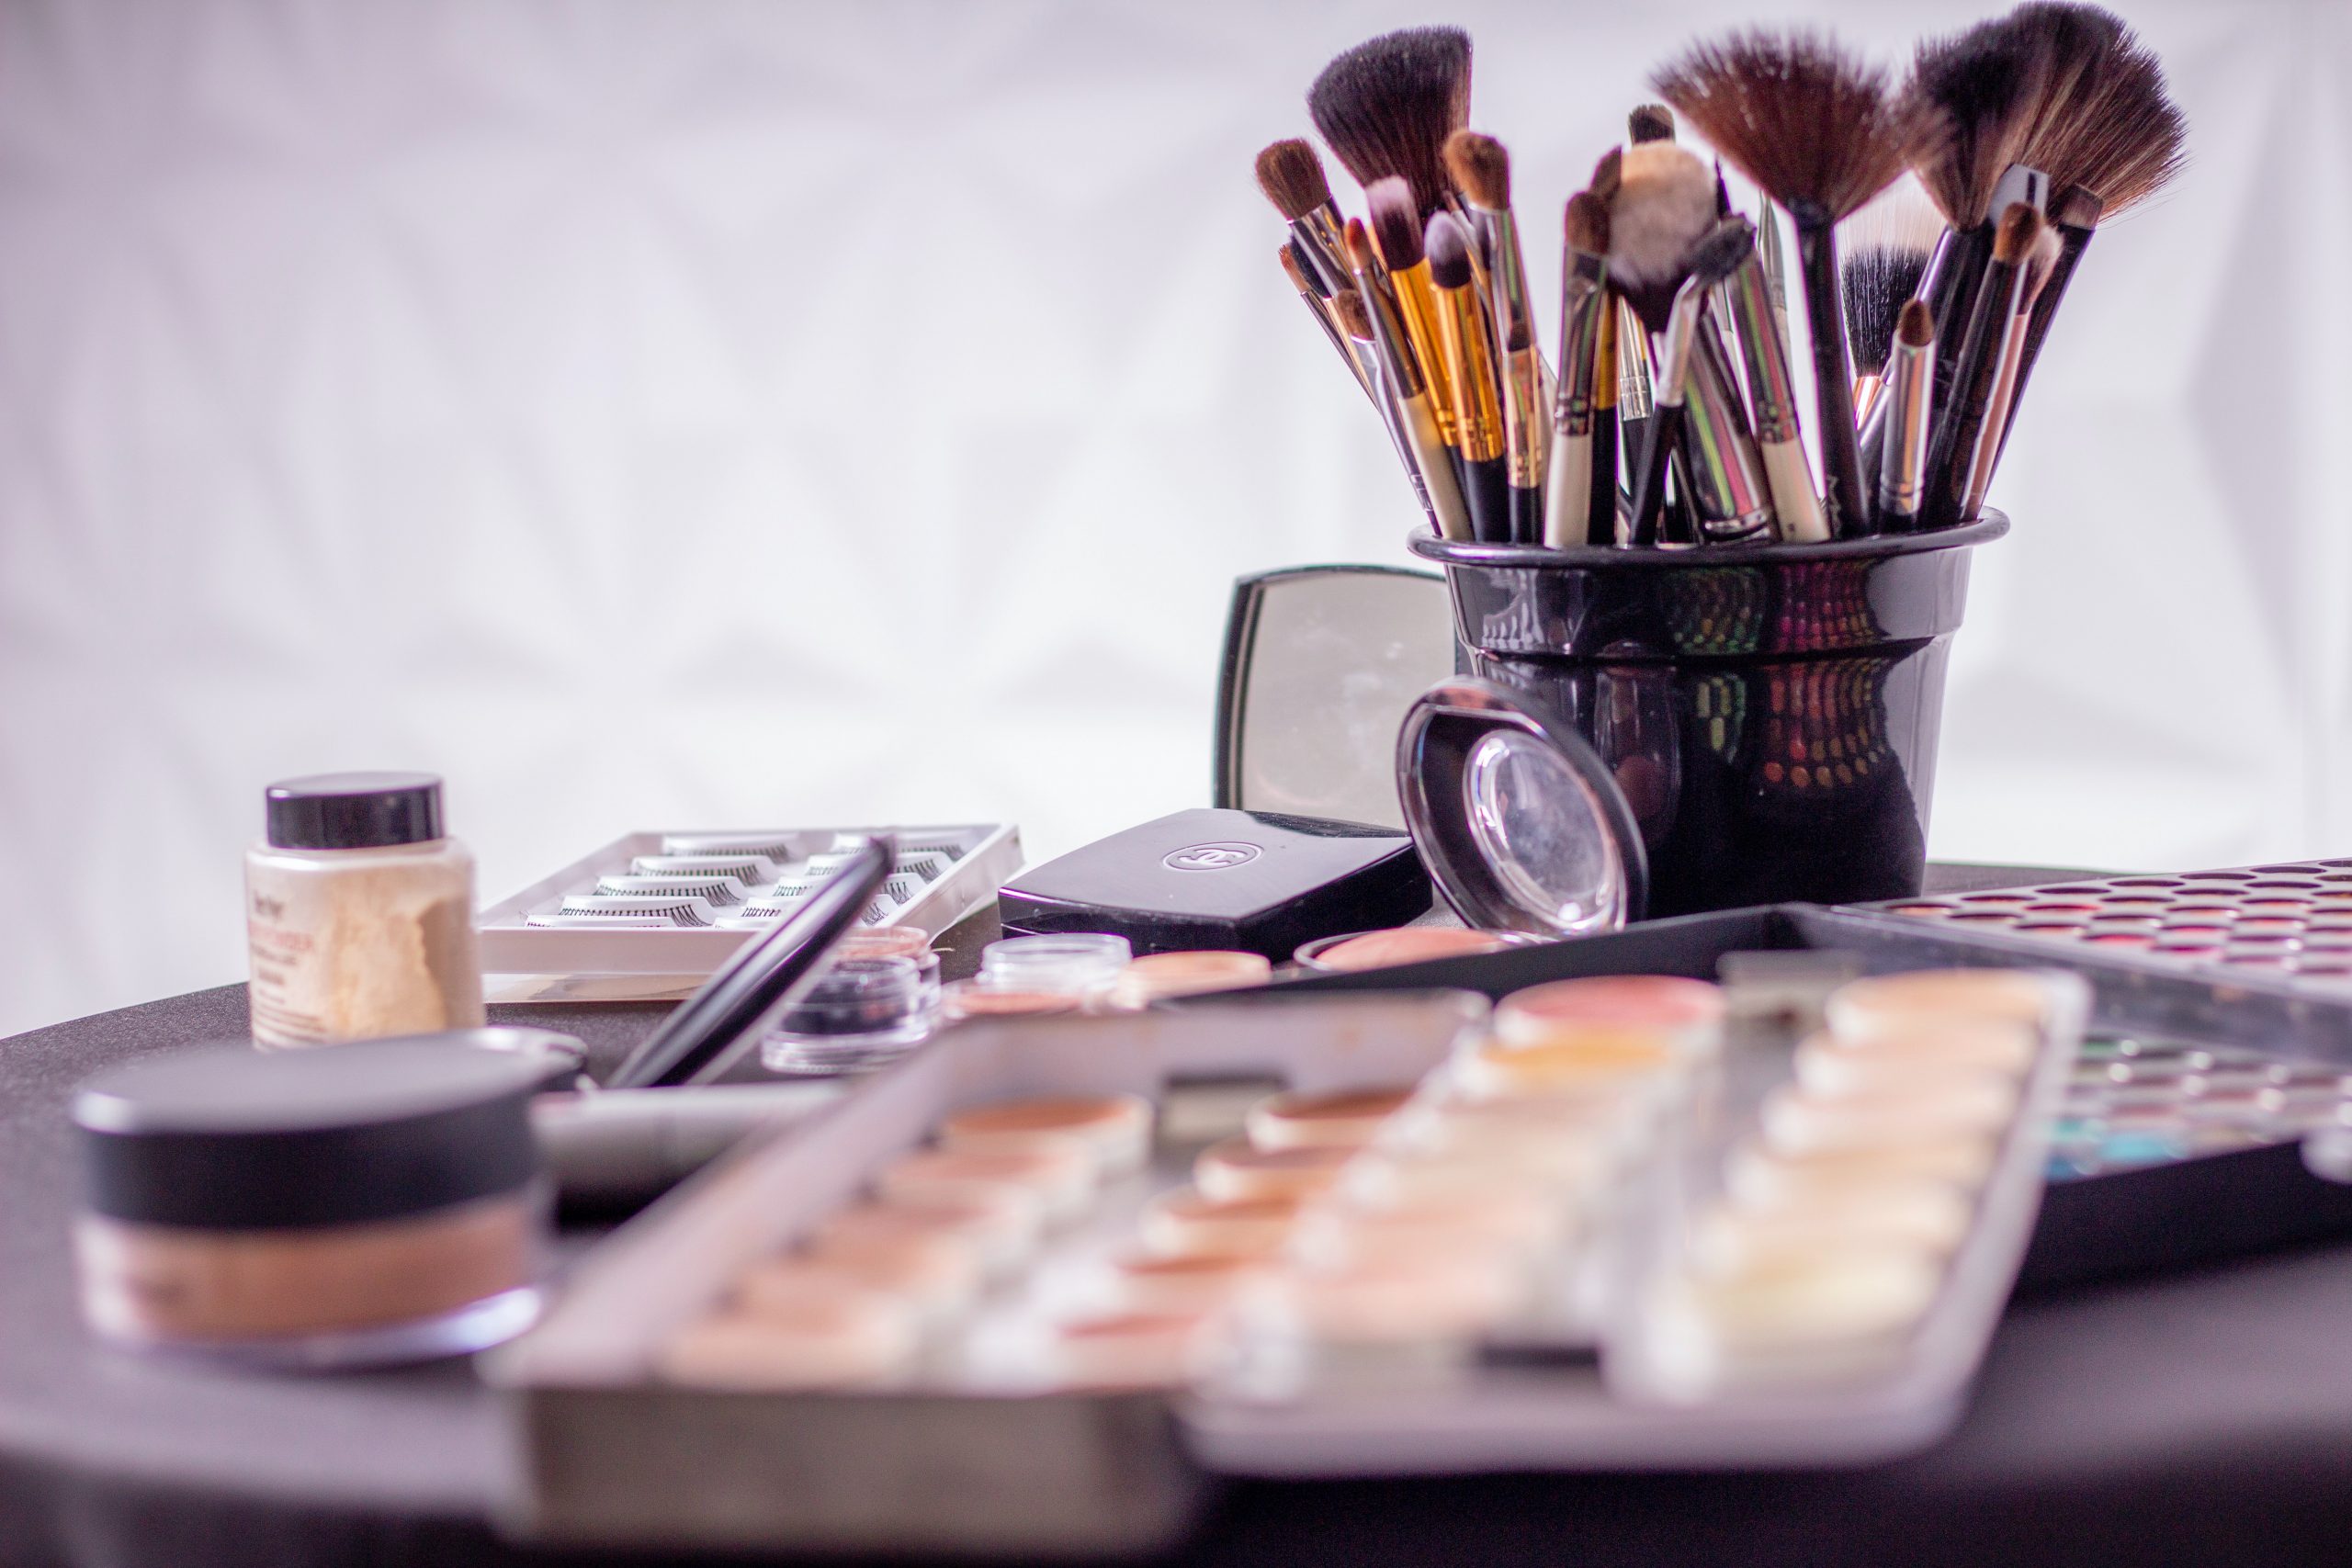 4 makeup products to take on the go